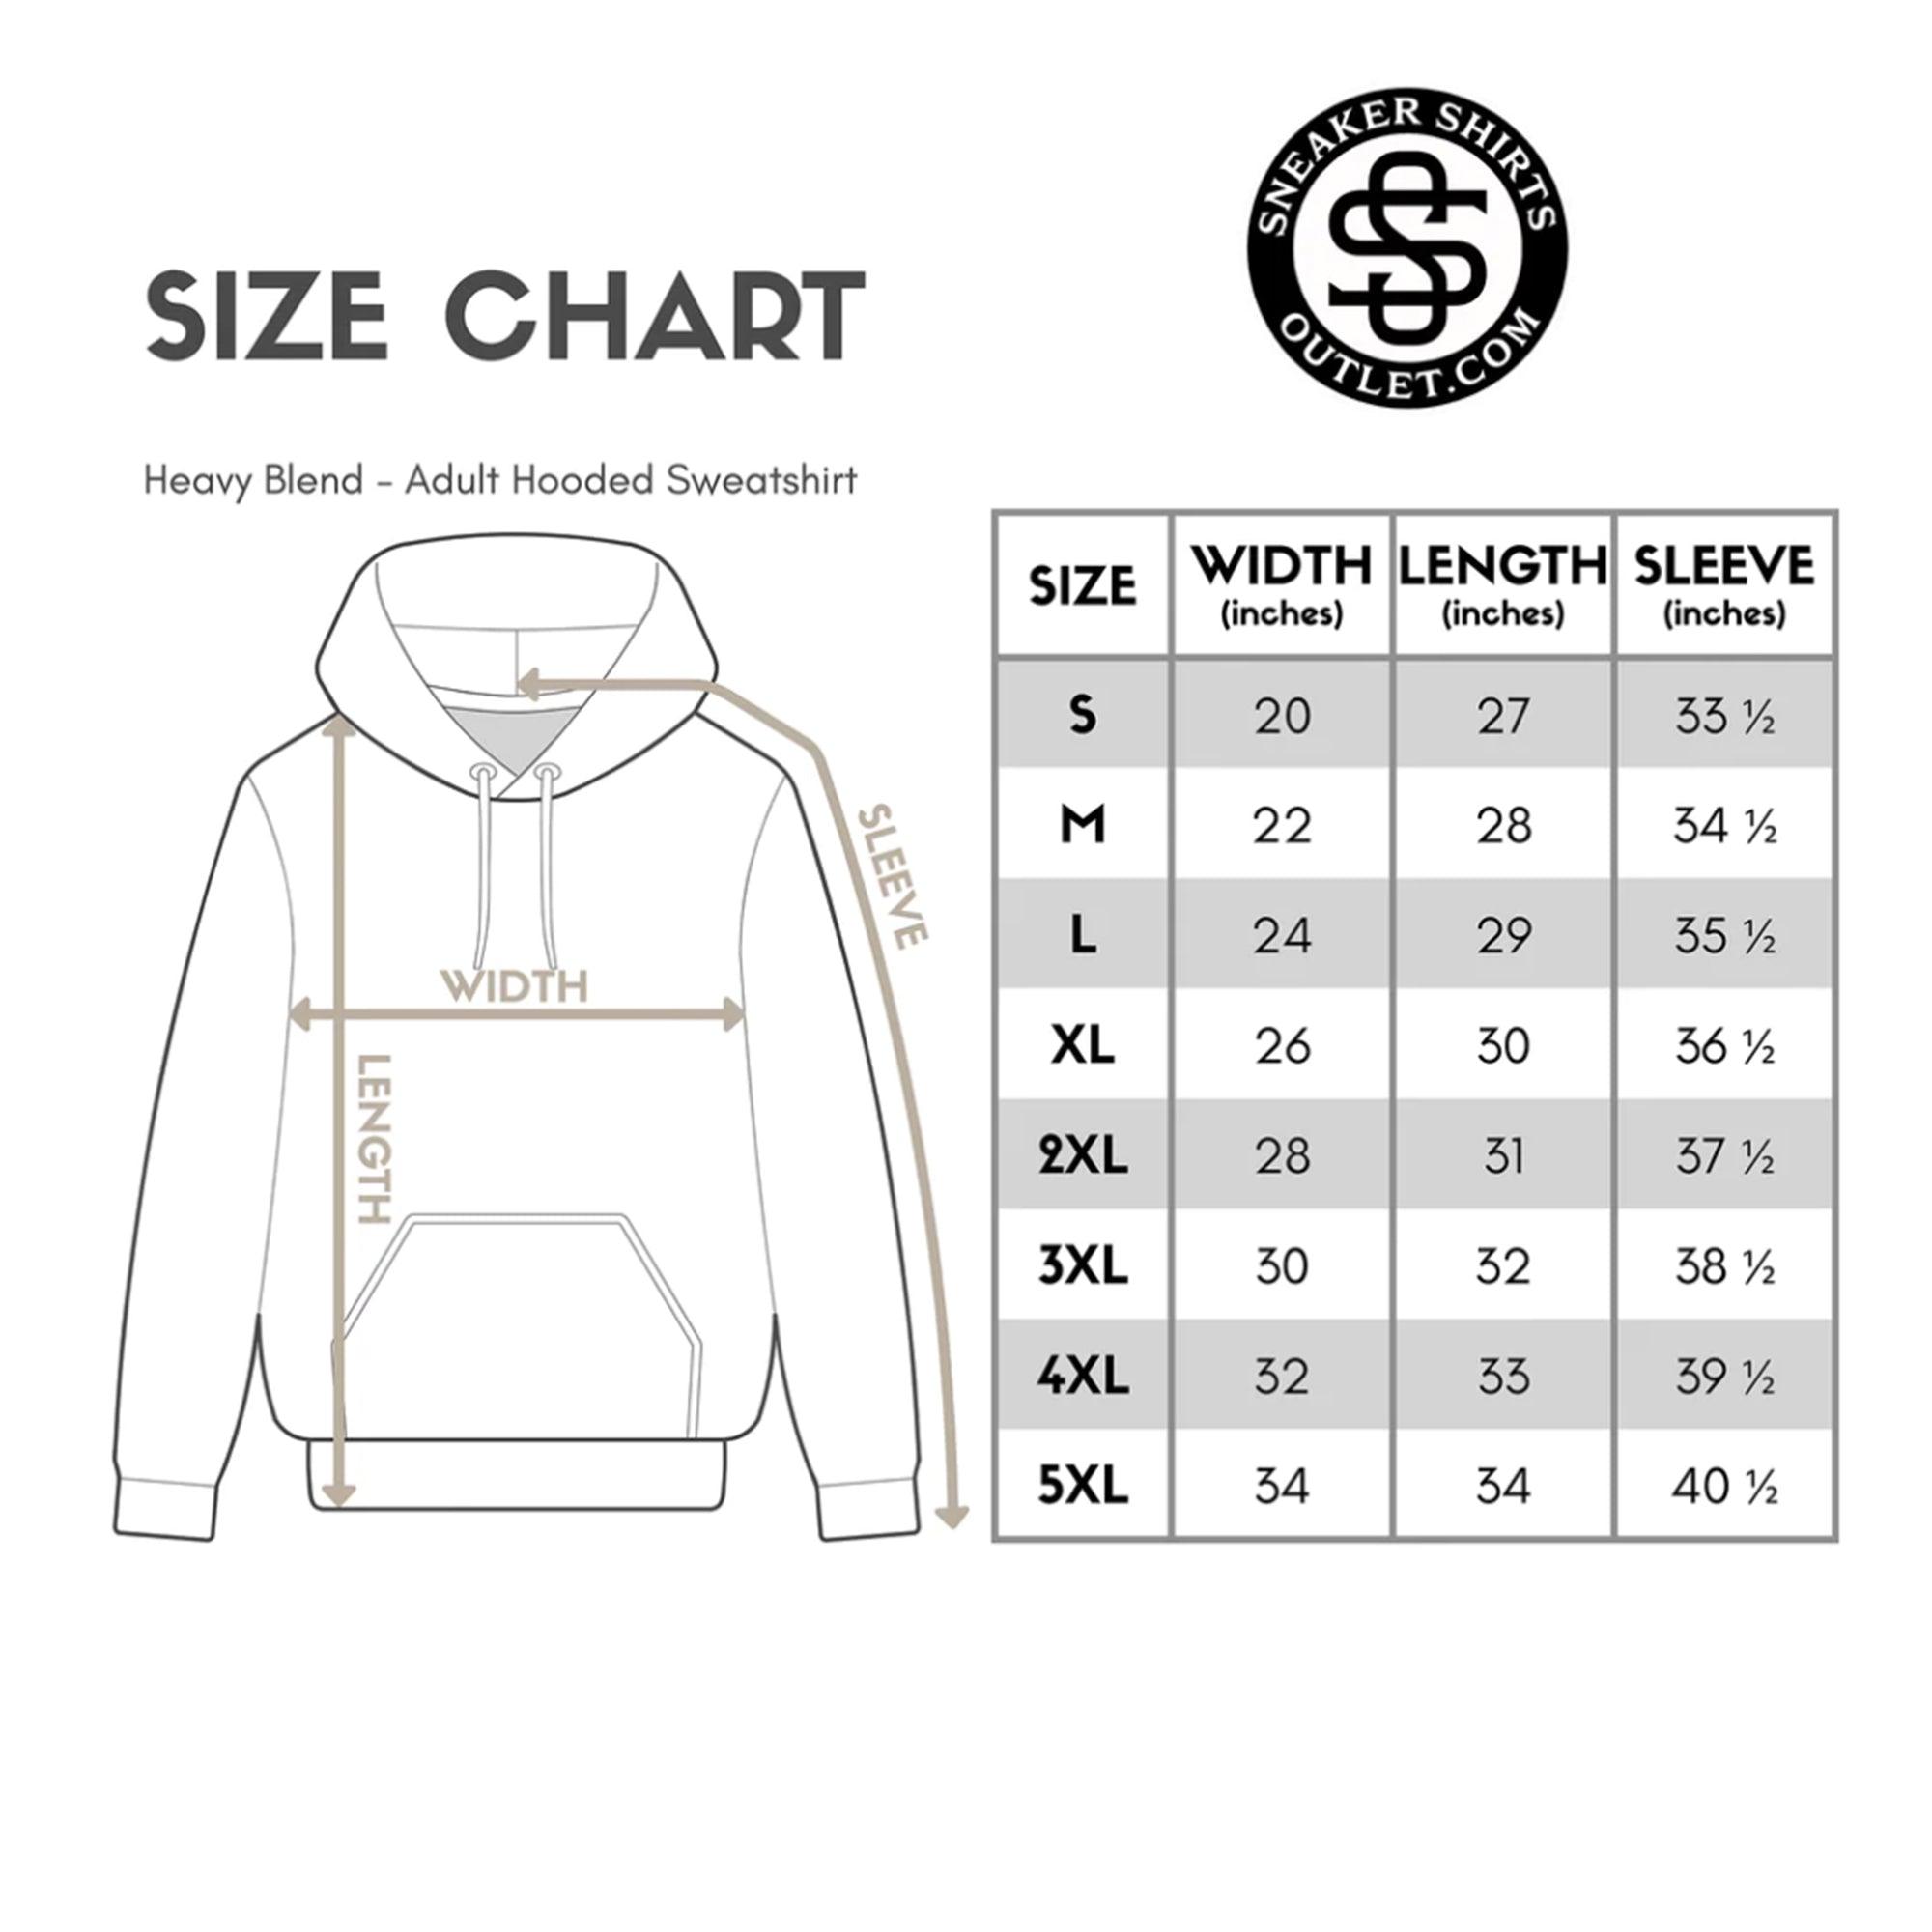 size chart 23 Melting Hoodie Nike Dunks Mid Social Status Free Lunch Strawberry Milk photo